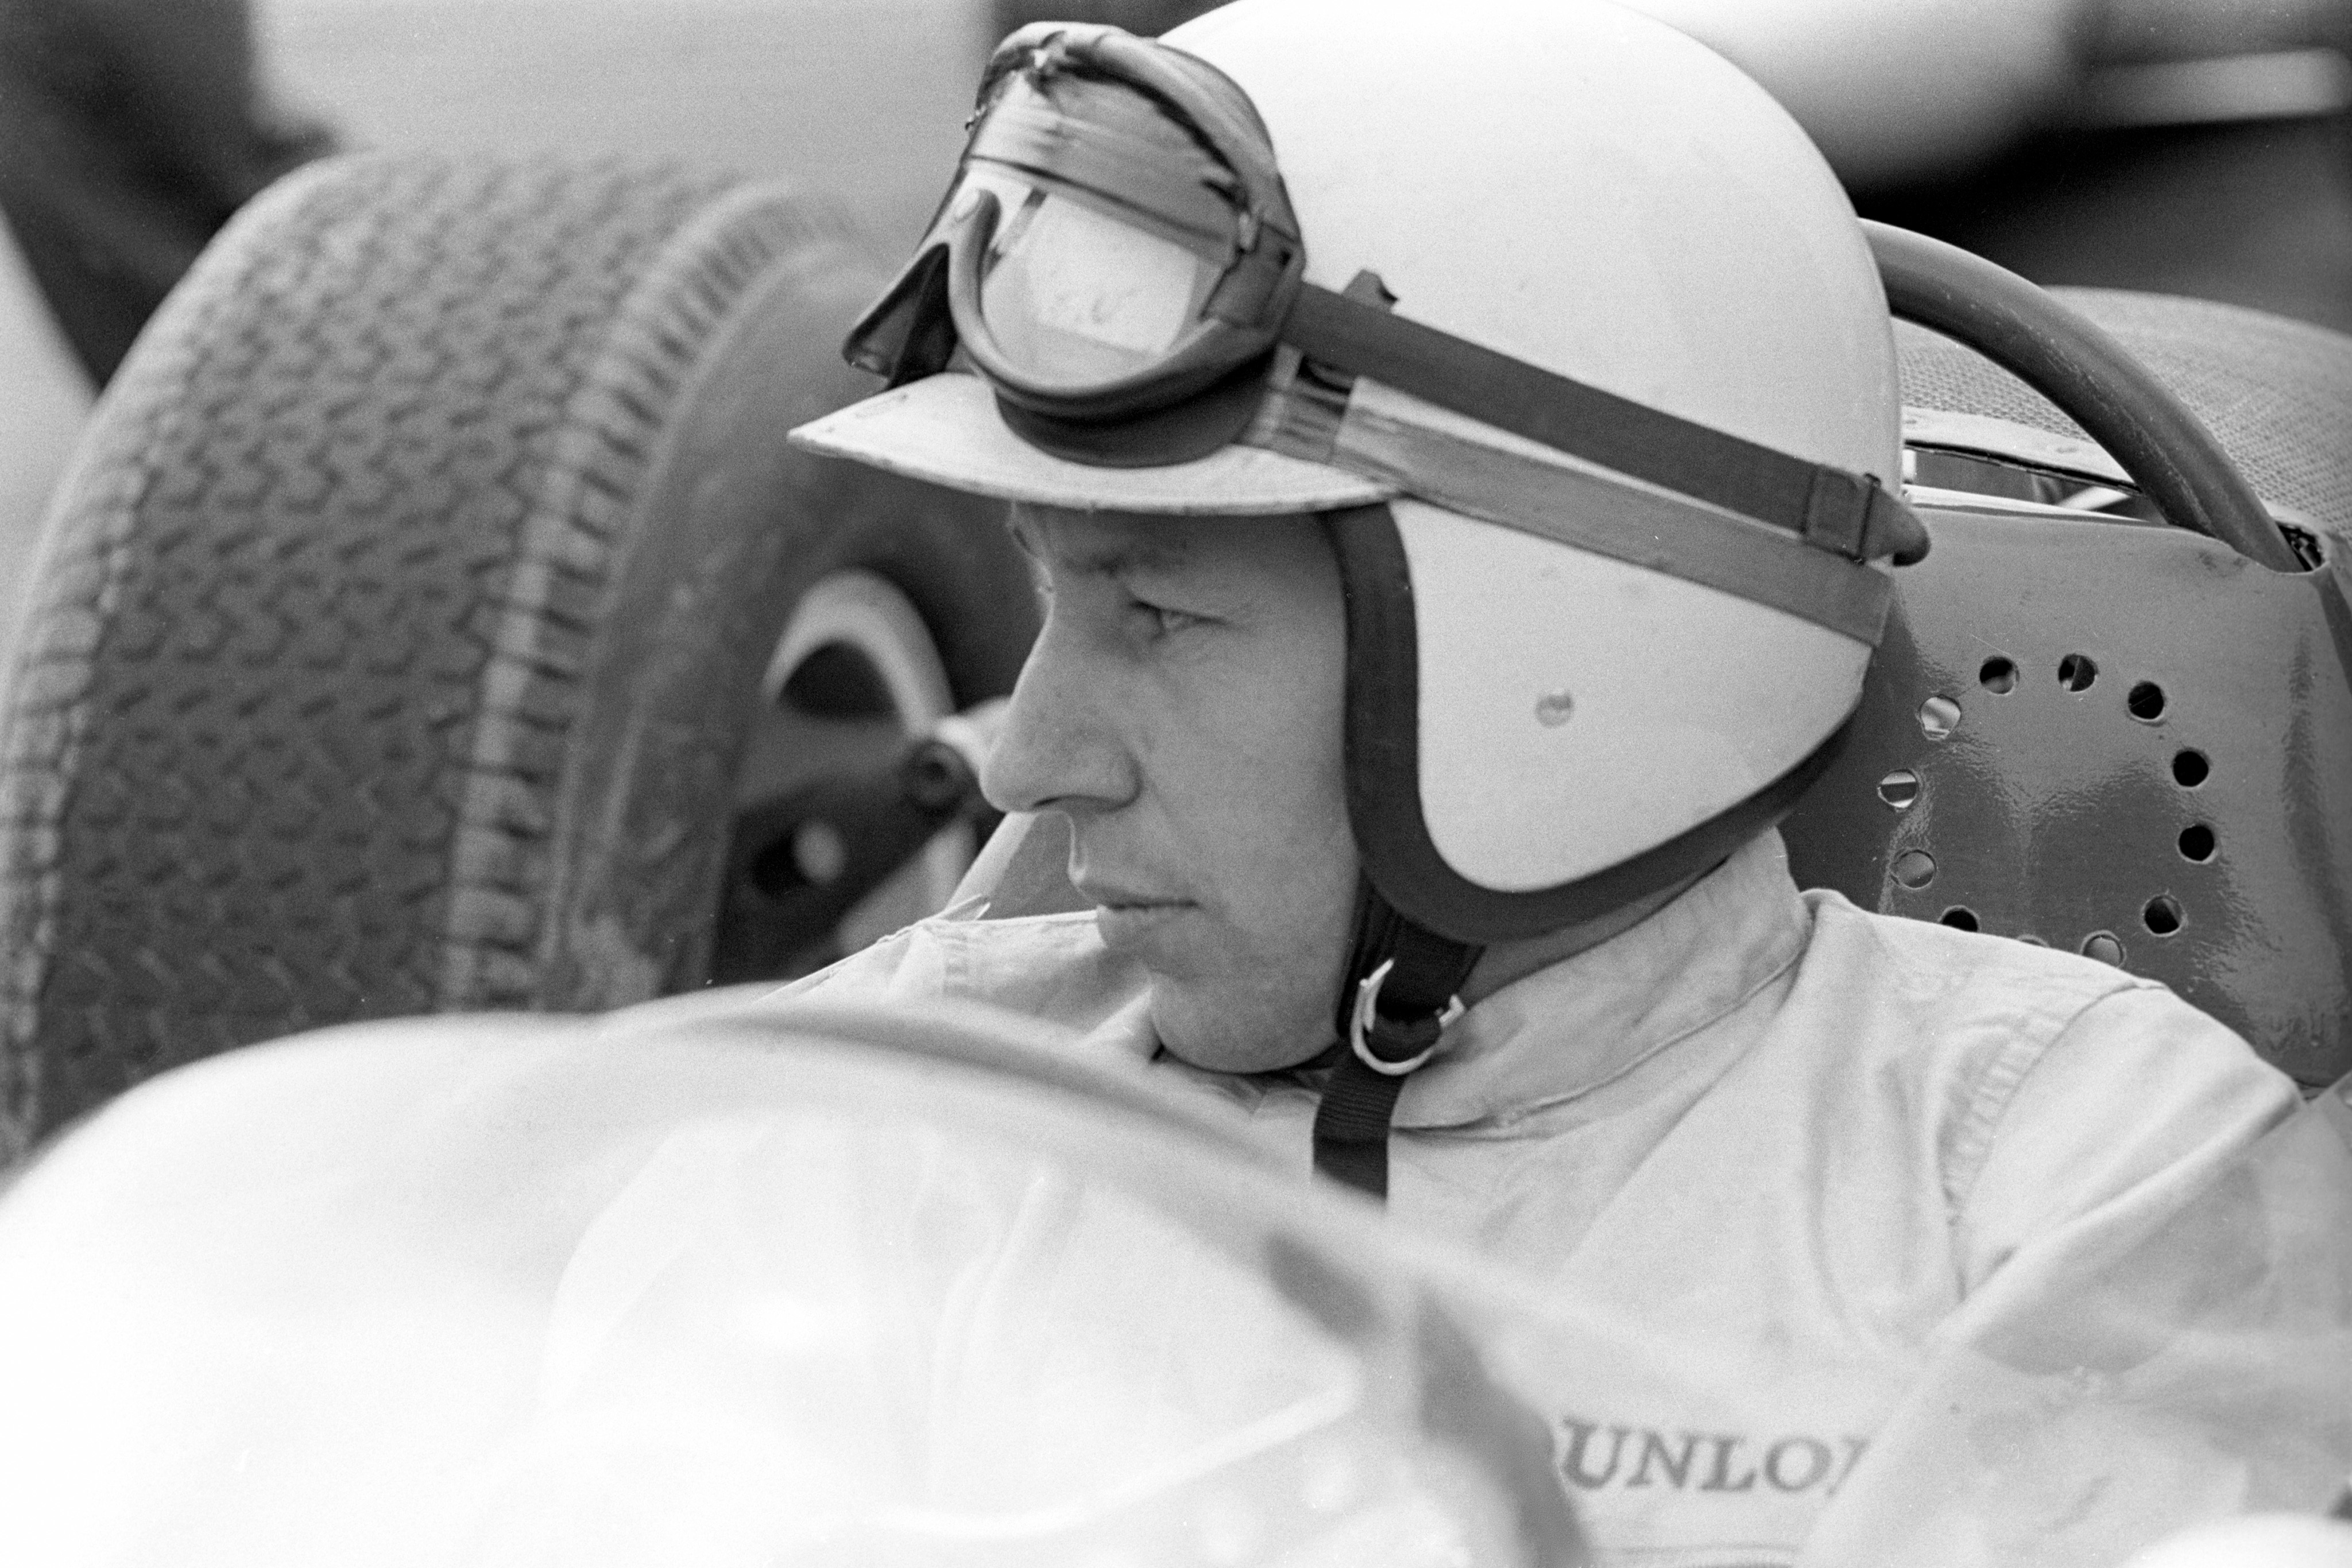 John Surtees in the cockpit of his Ferrari at Brands Hatch in 1964